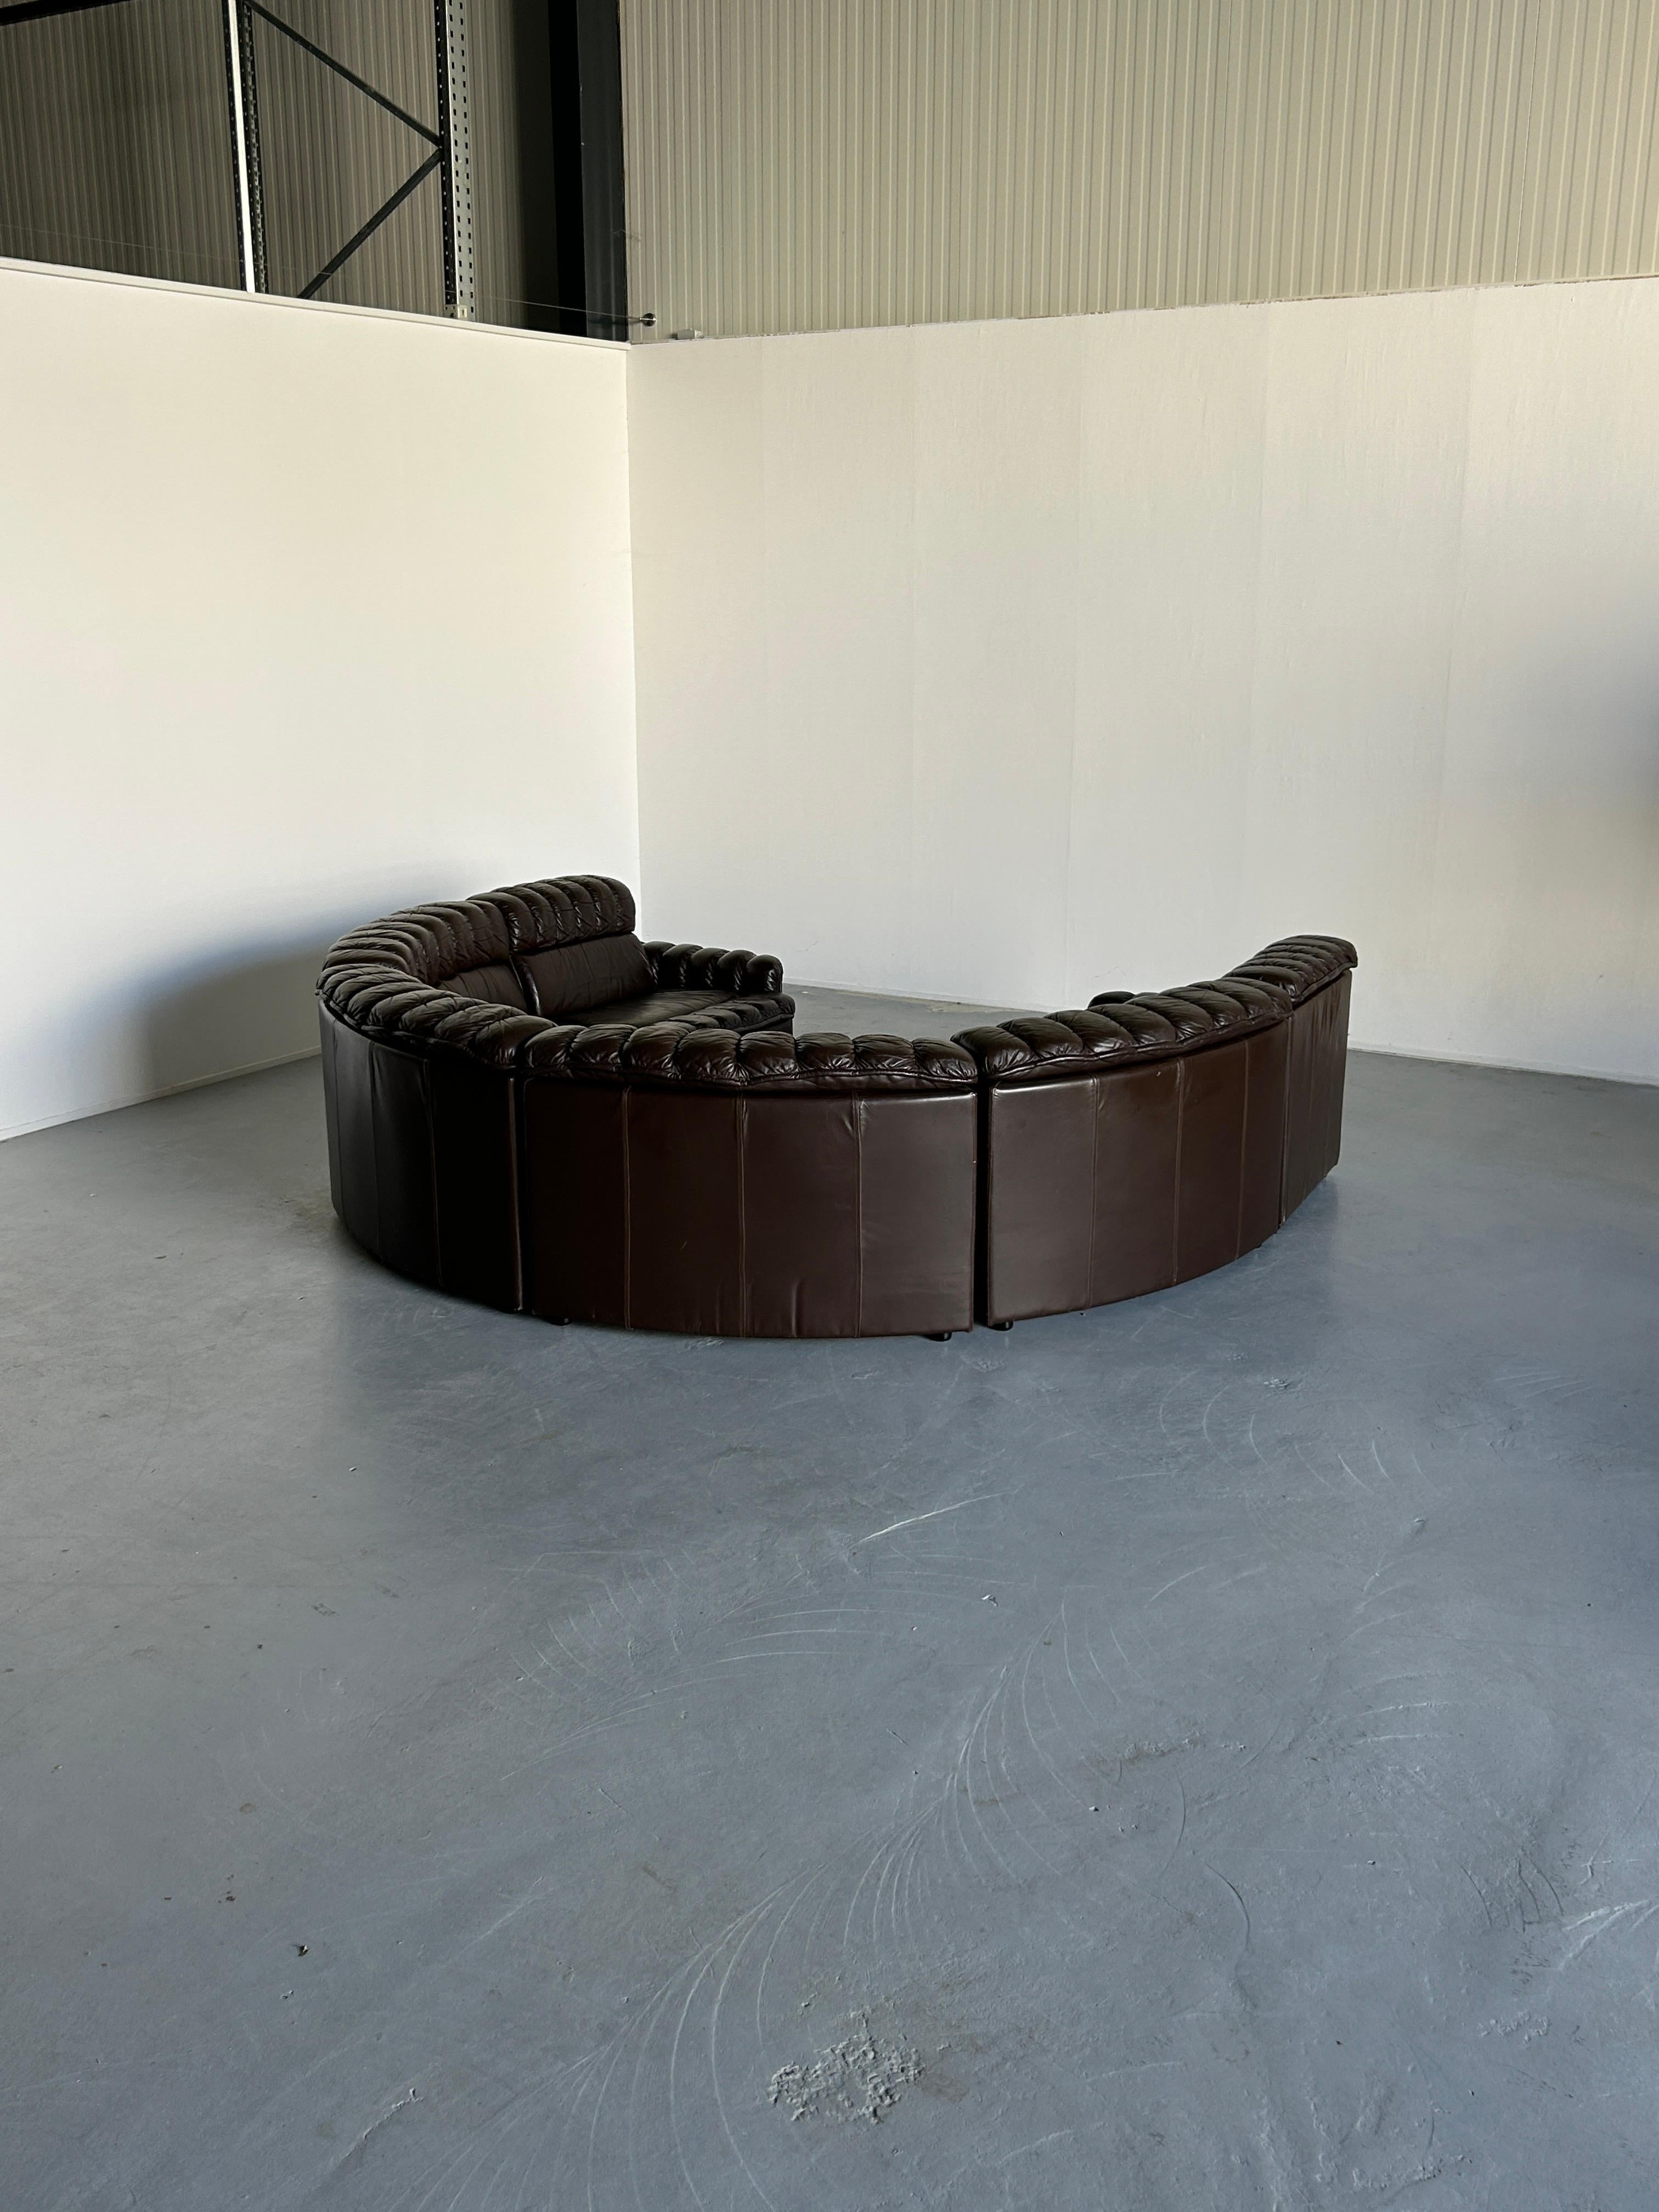 Late 20th Century Mid-Century-Modern Leather Snake Sofa in style of De Sede DS-600 Non-Stop, 1970s For Sale